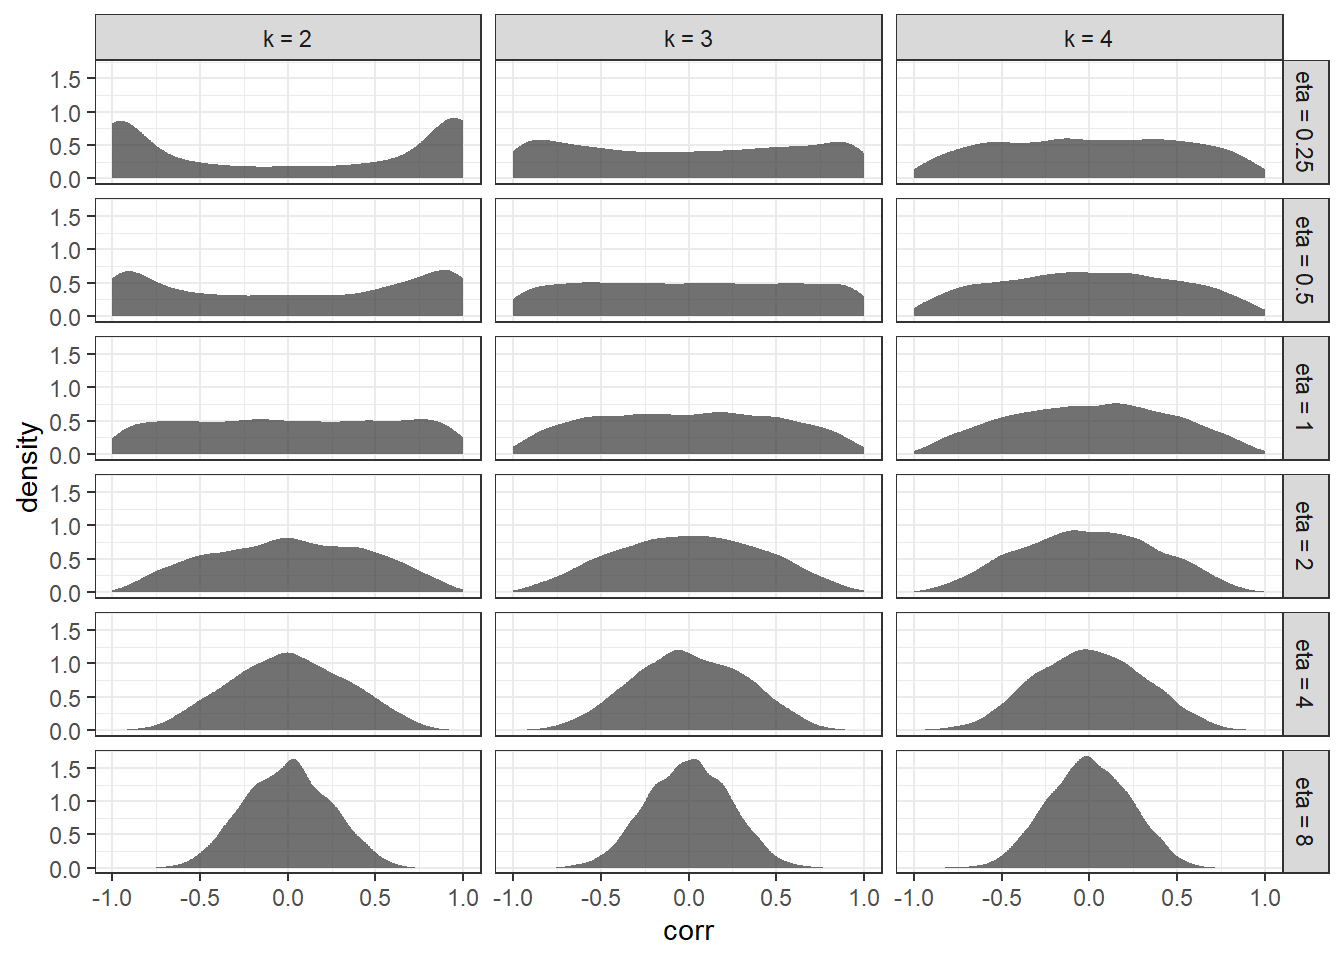 Simulated distributions of correlations from the LKJ distribution. $k$ is the matrix size, and $\eta$ is the parameter in the LKJ distribution.